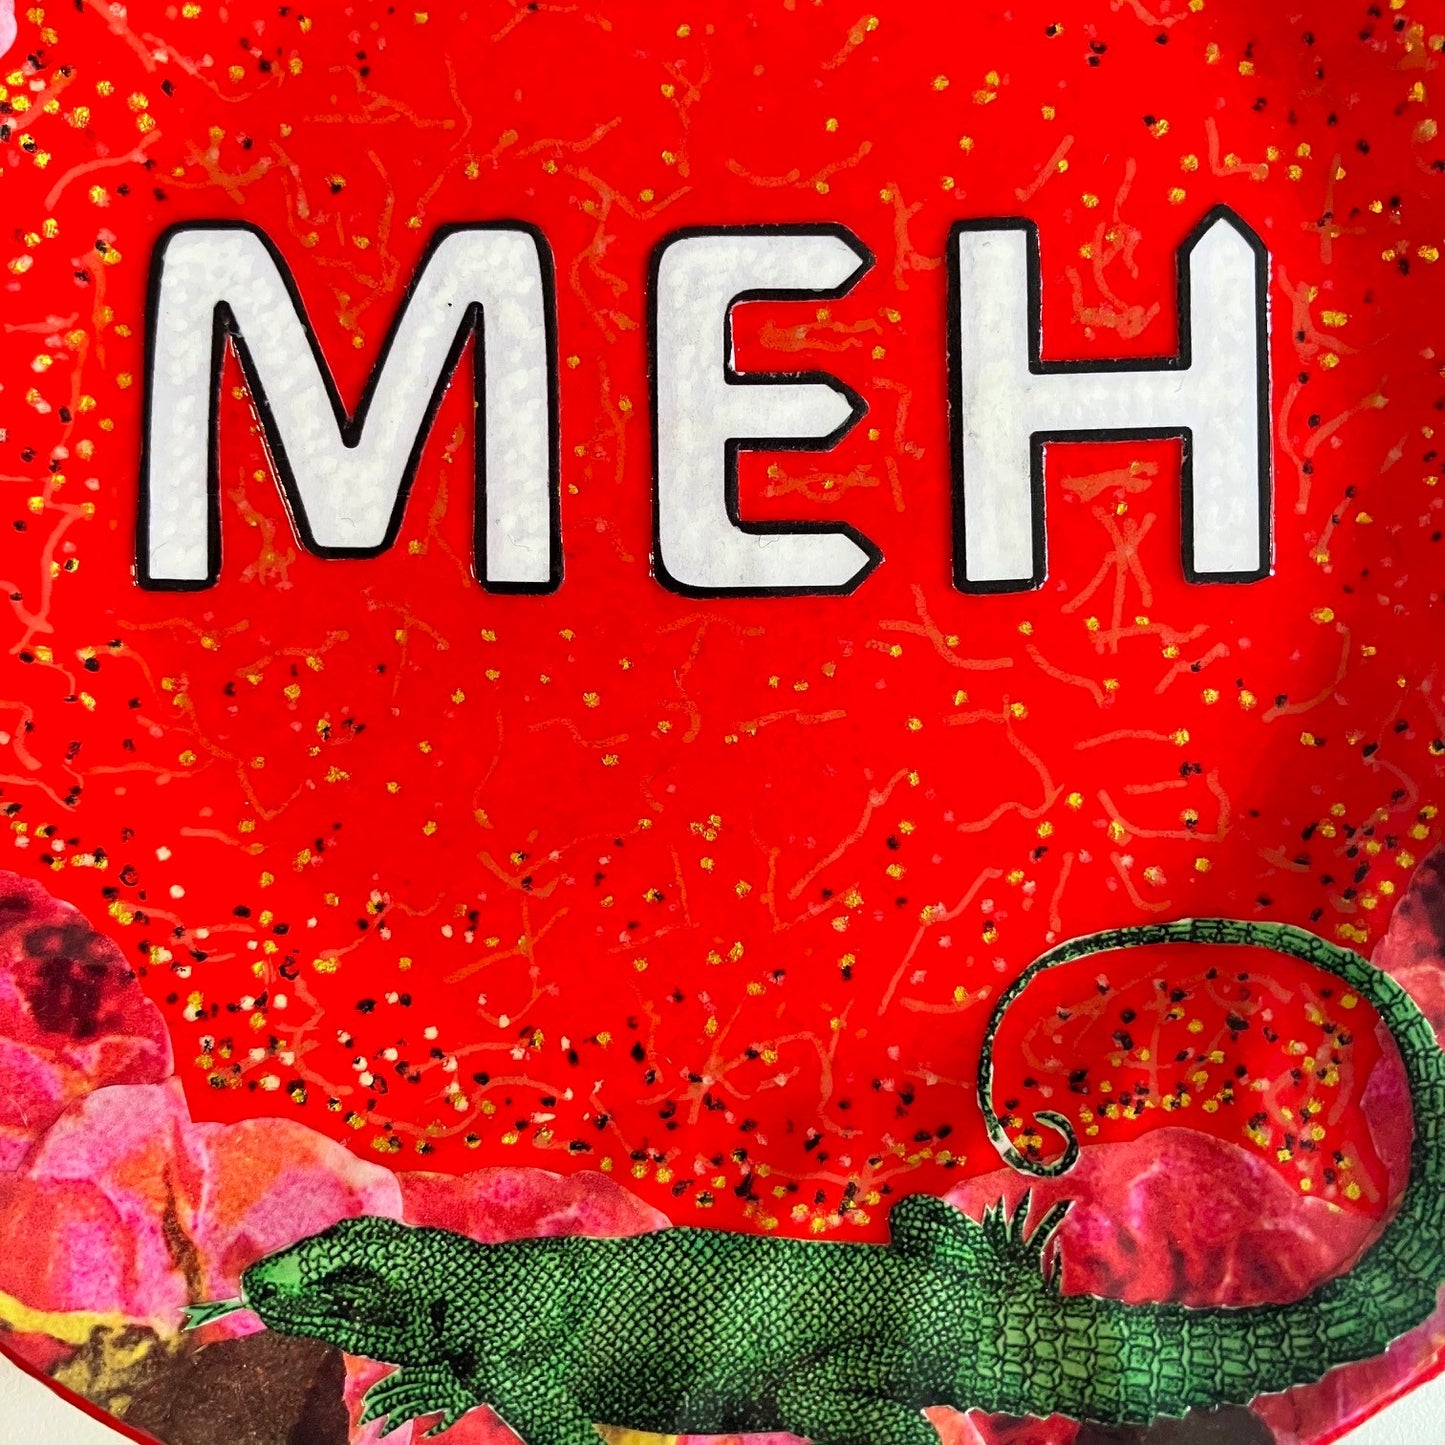 Red Upcycled Wall Plate - "Meh" - by House of Frisson